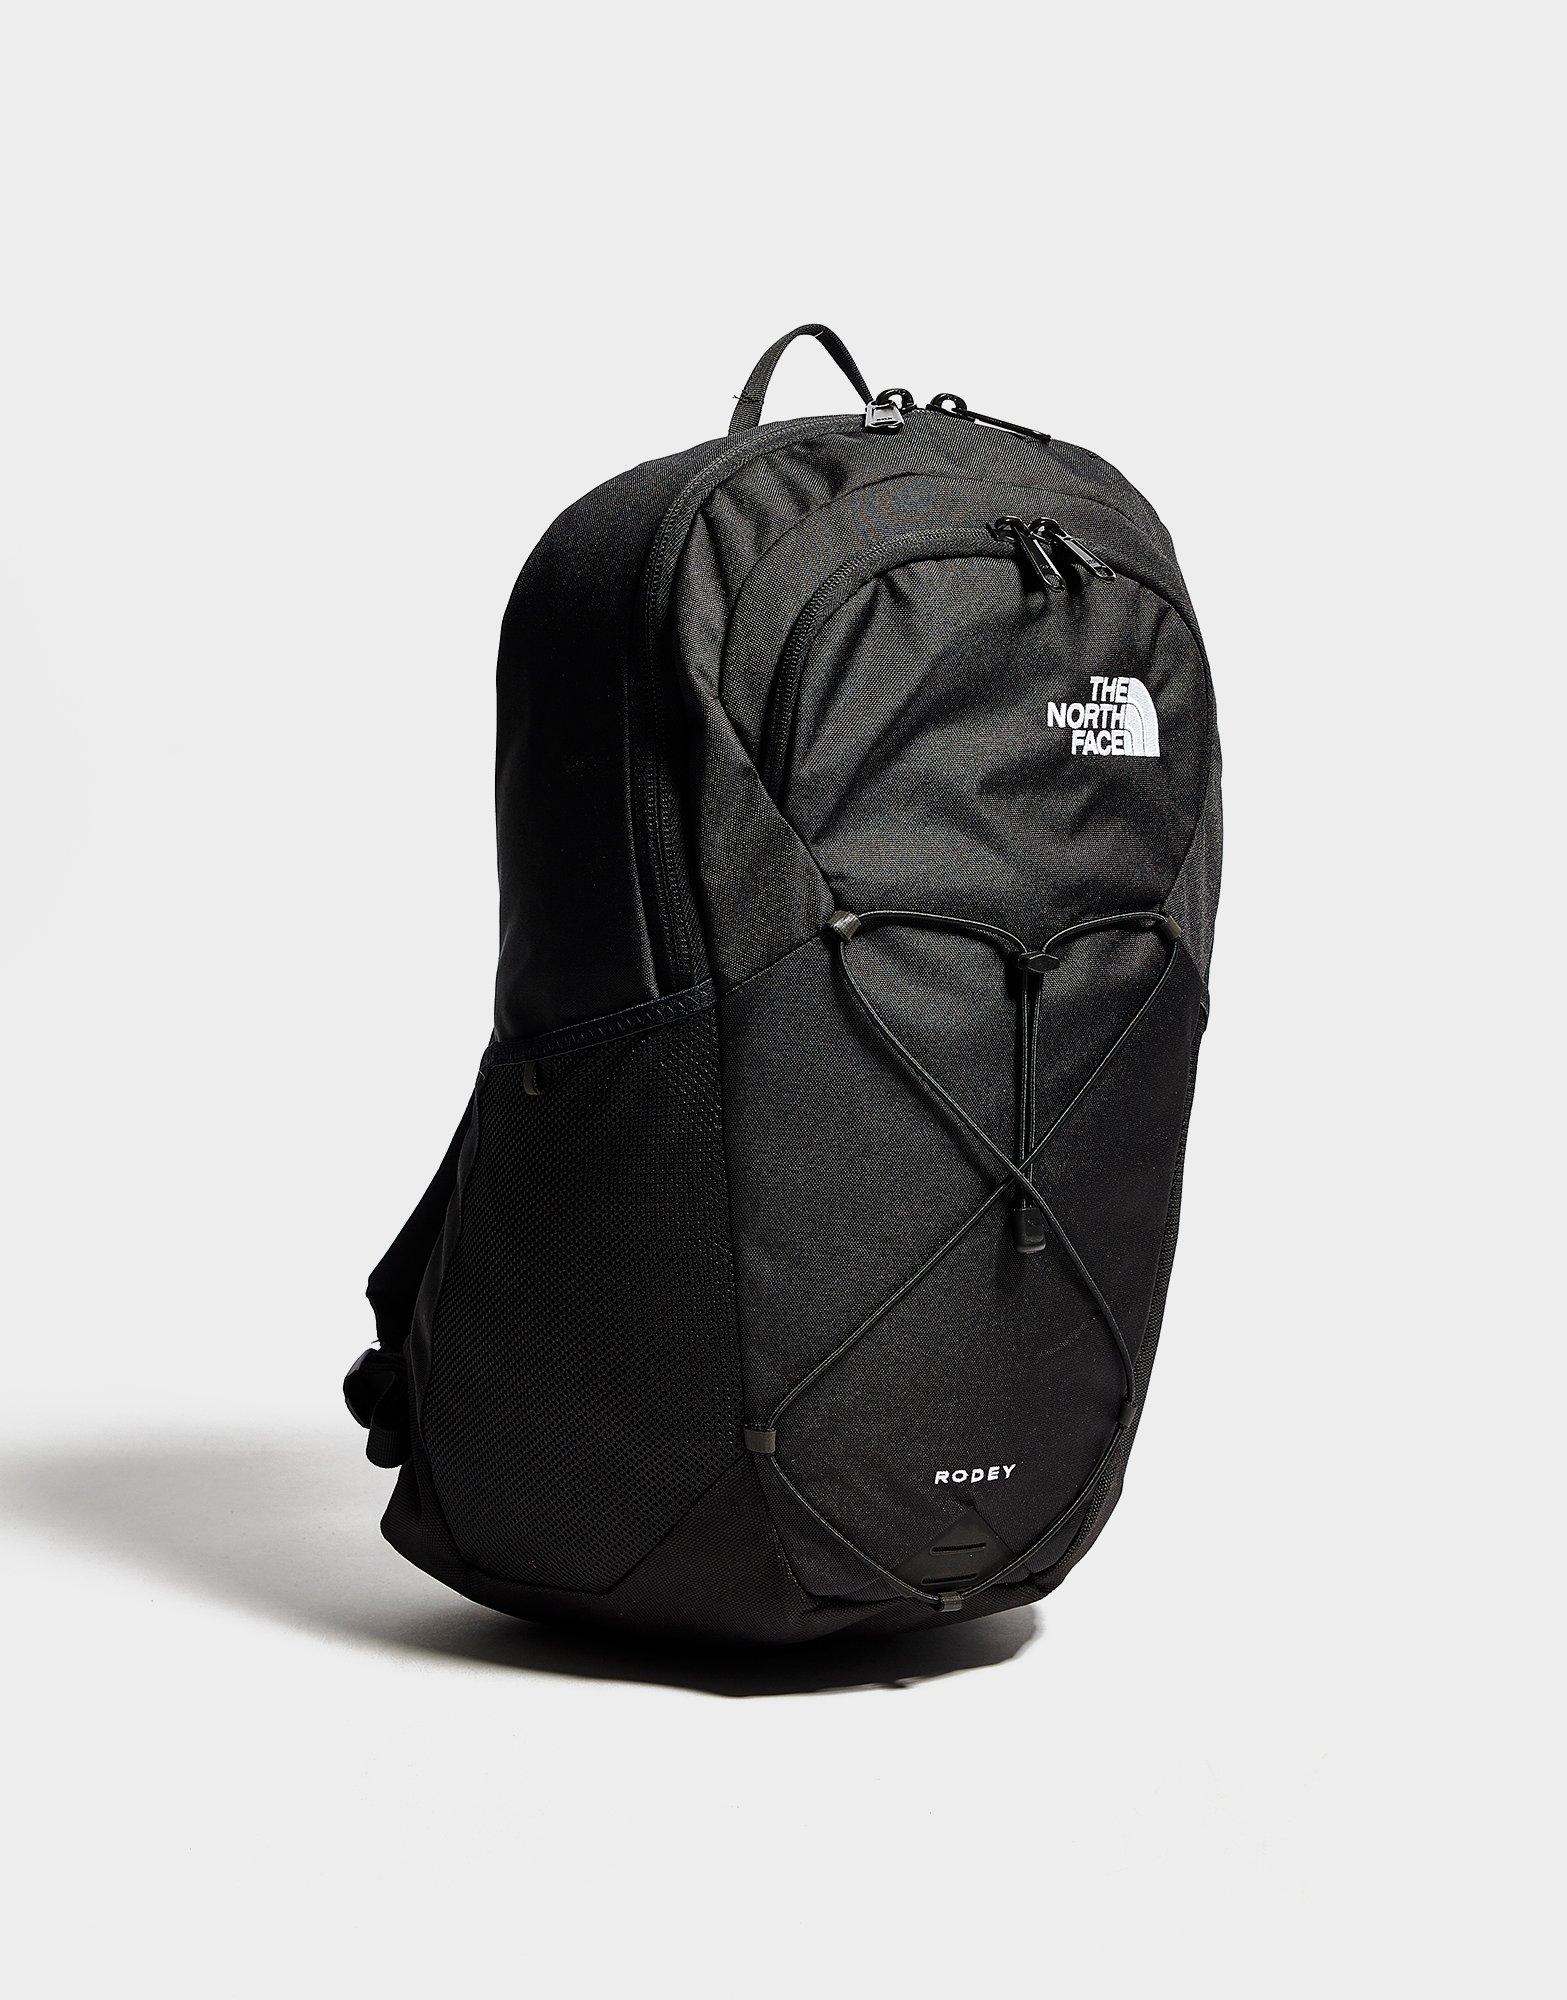 the north face rodey backpack in black